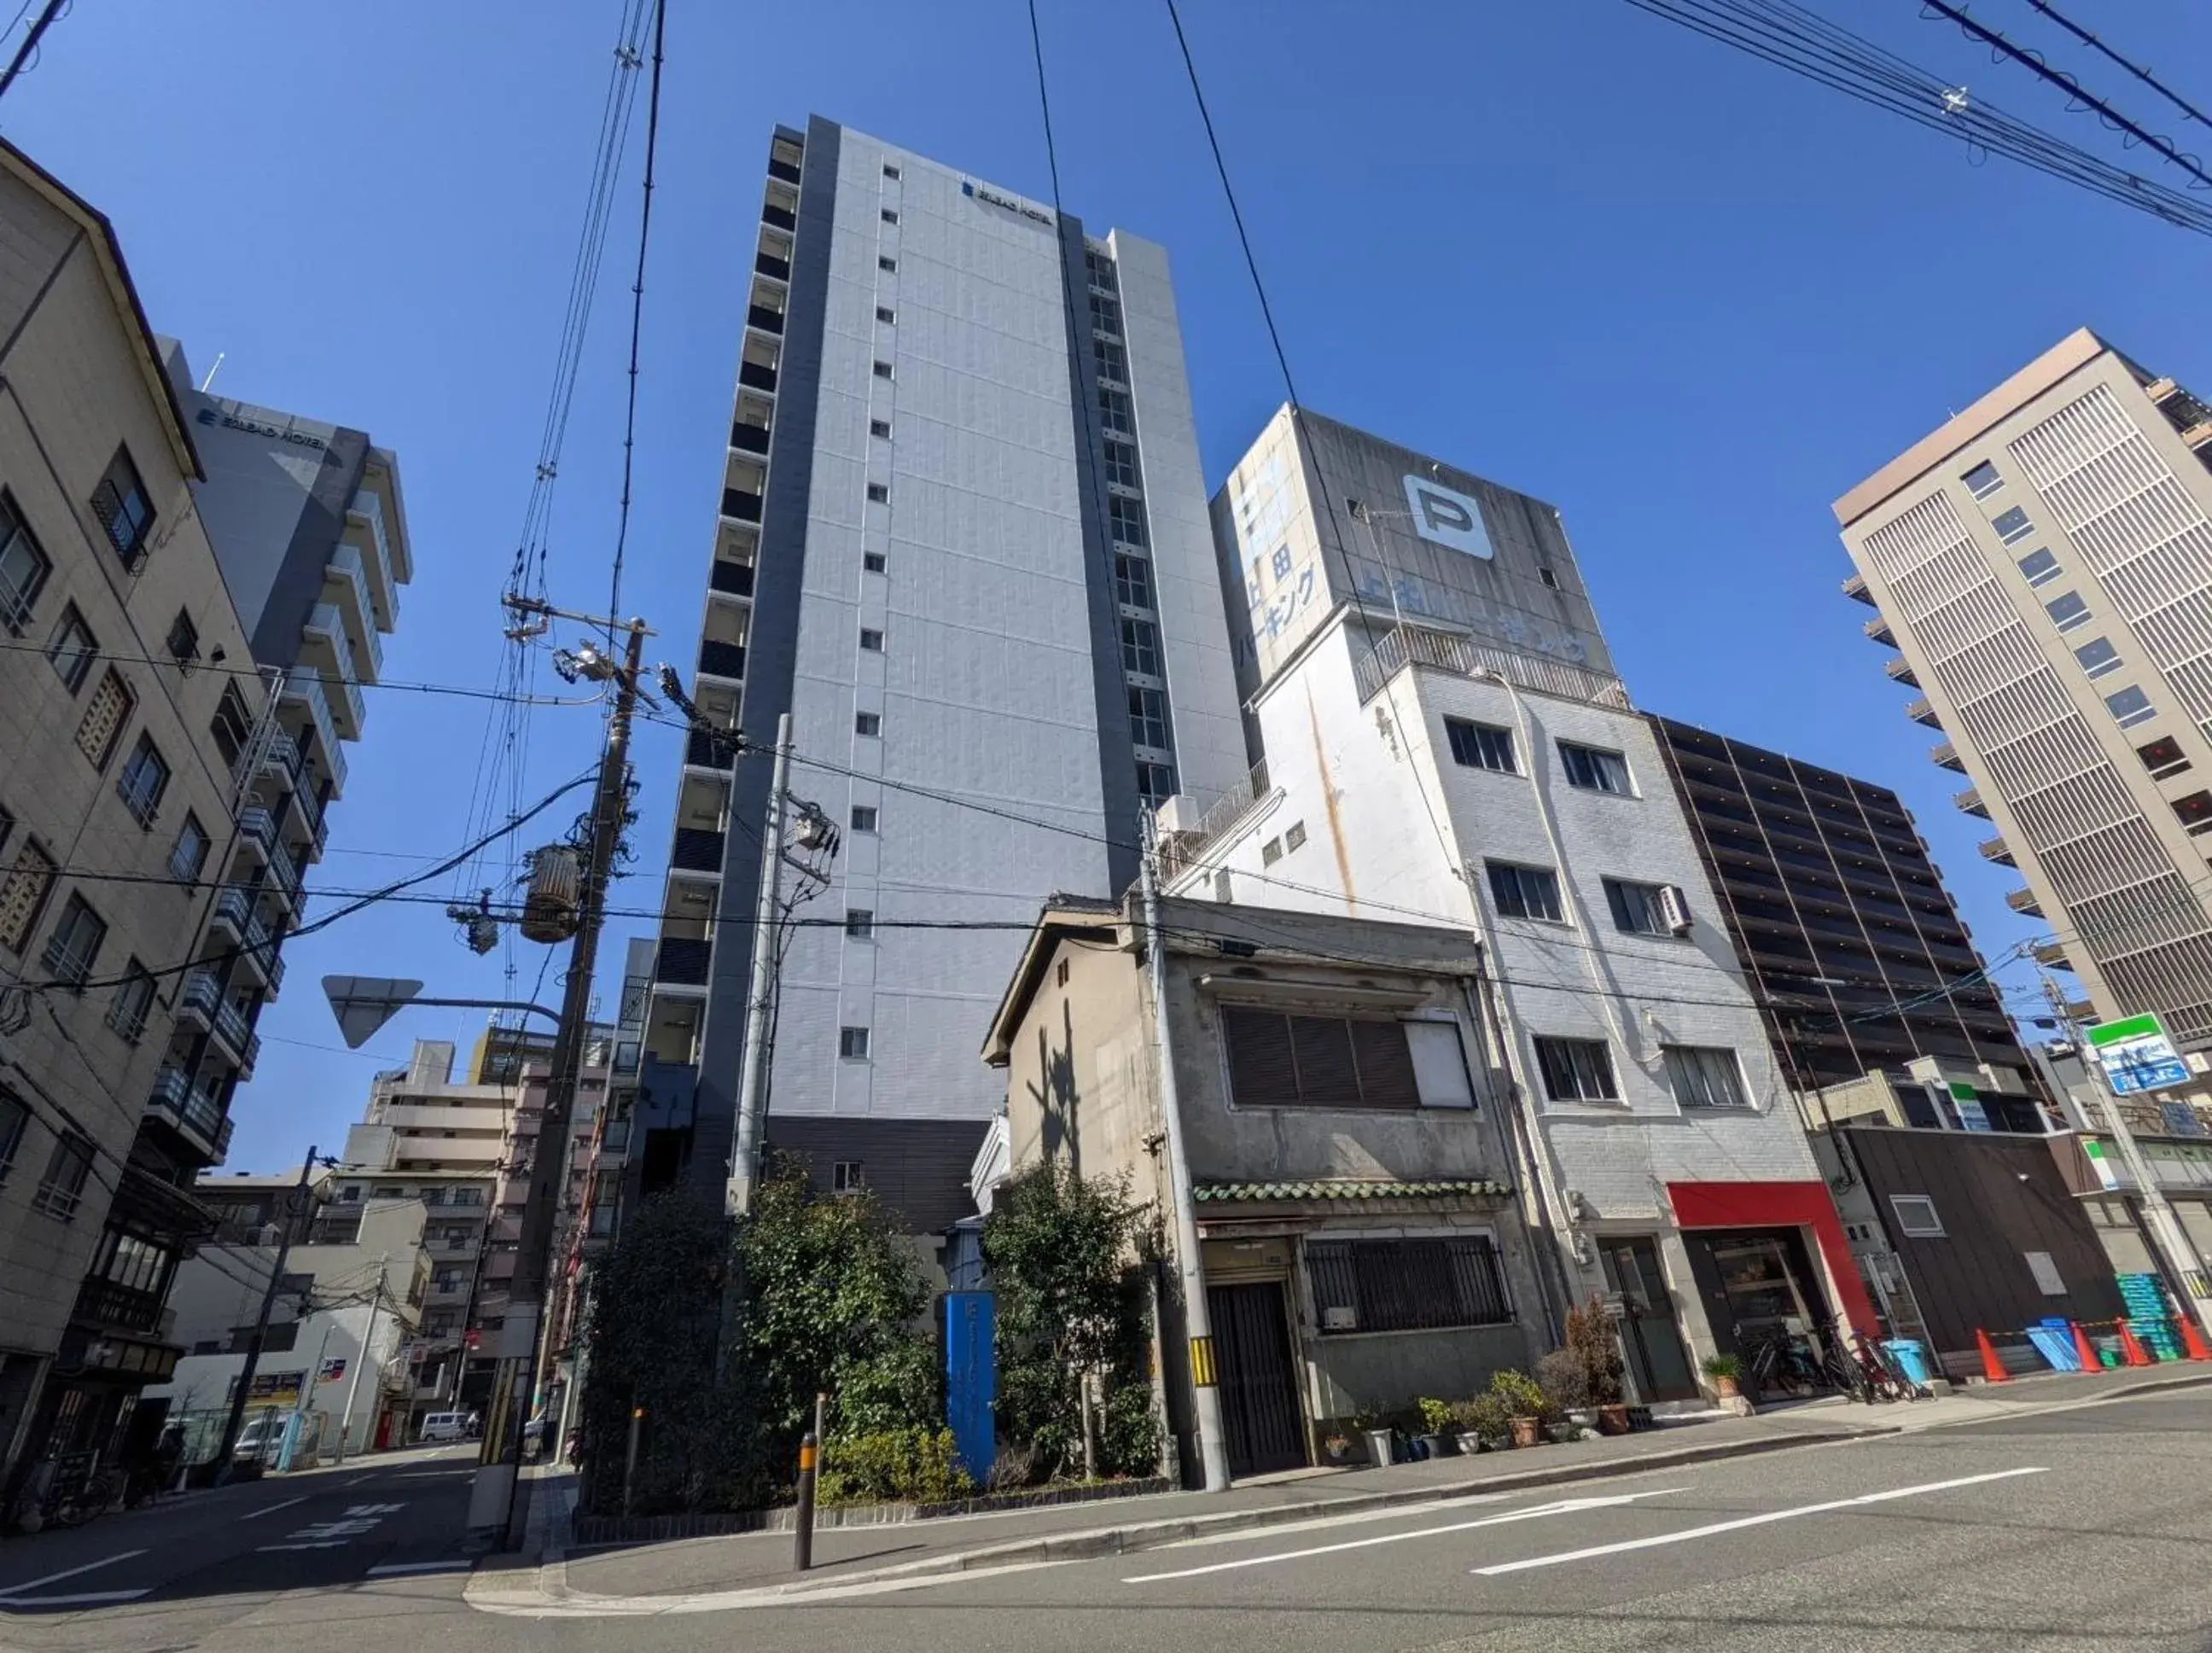 Off site, Property Building in ESLEAD HOTEL Namba South Ⅲ